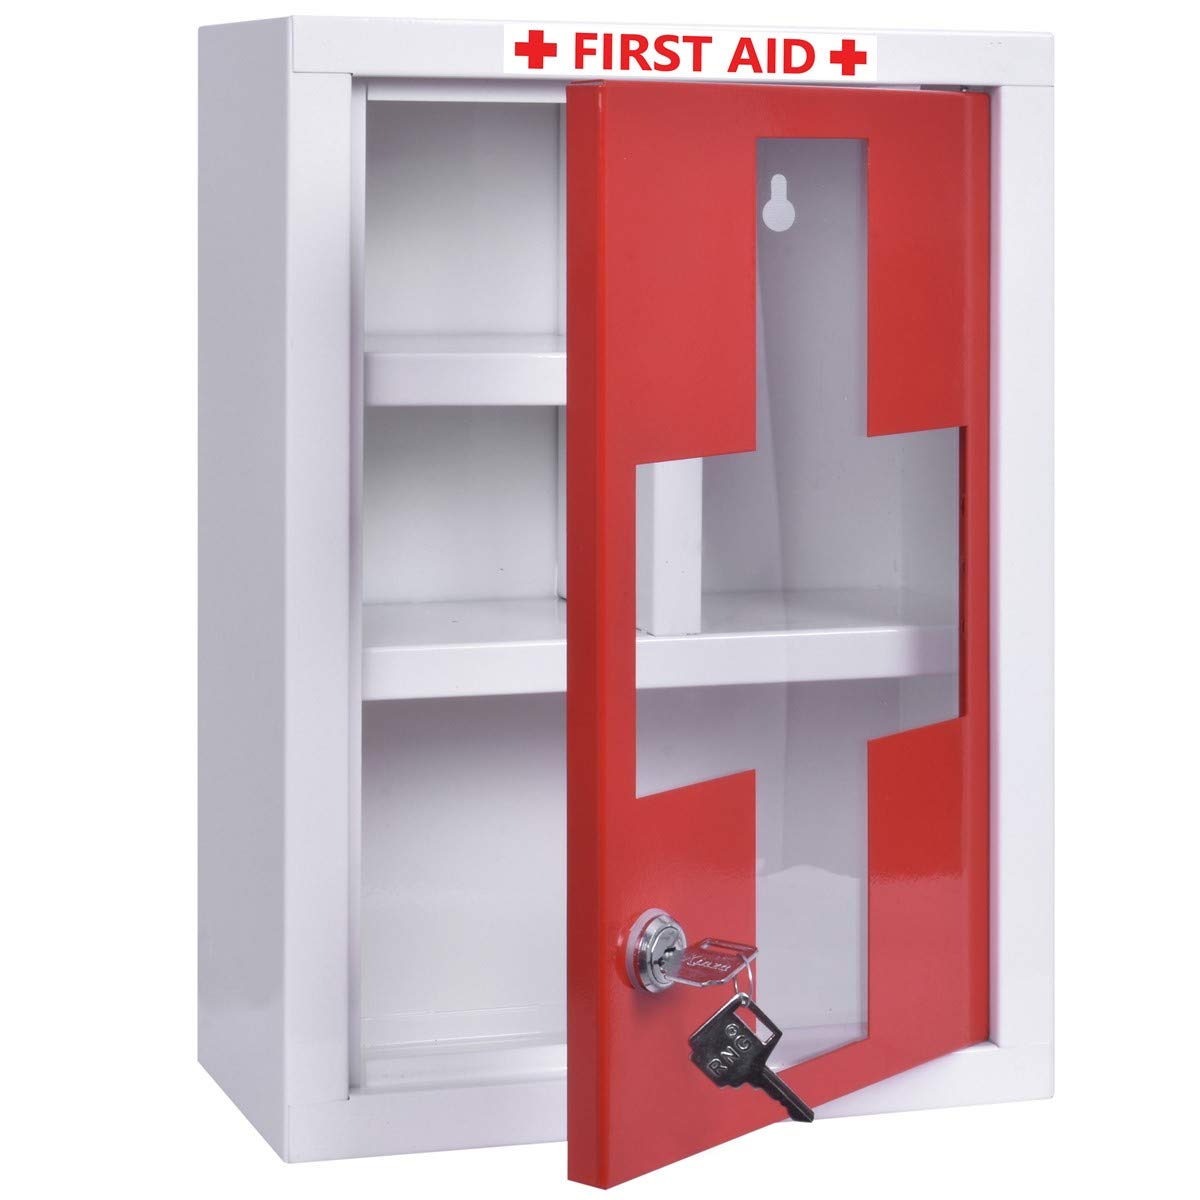 Large Metal First Aid Cabinet for the Office